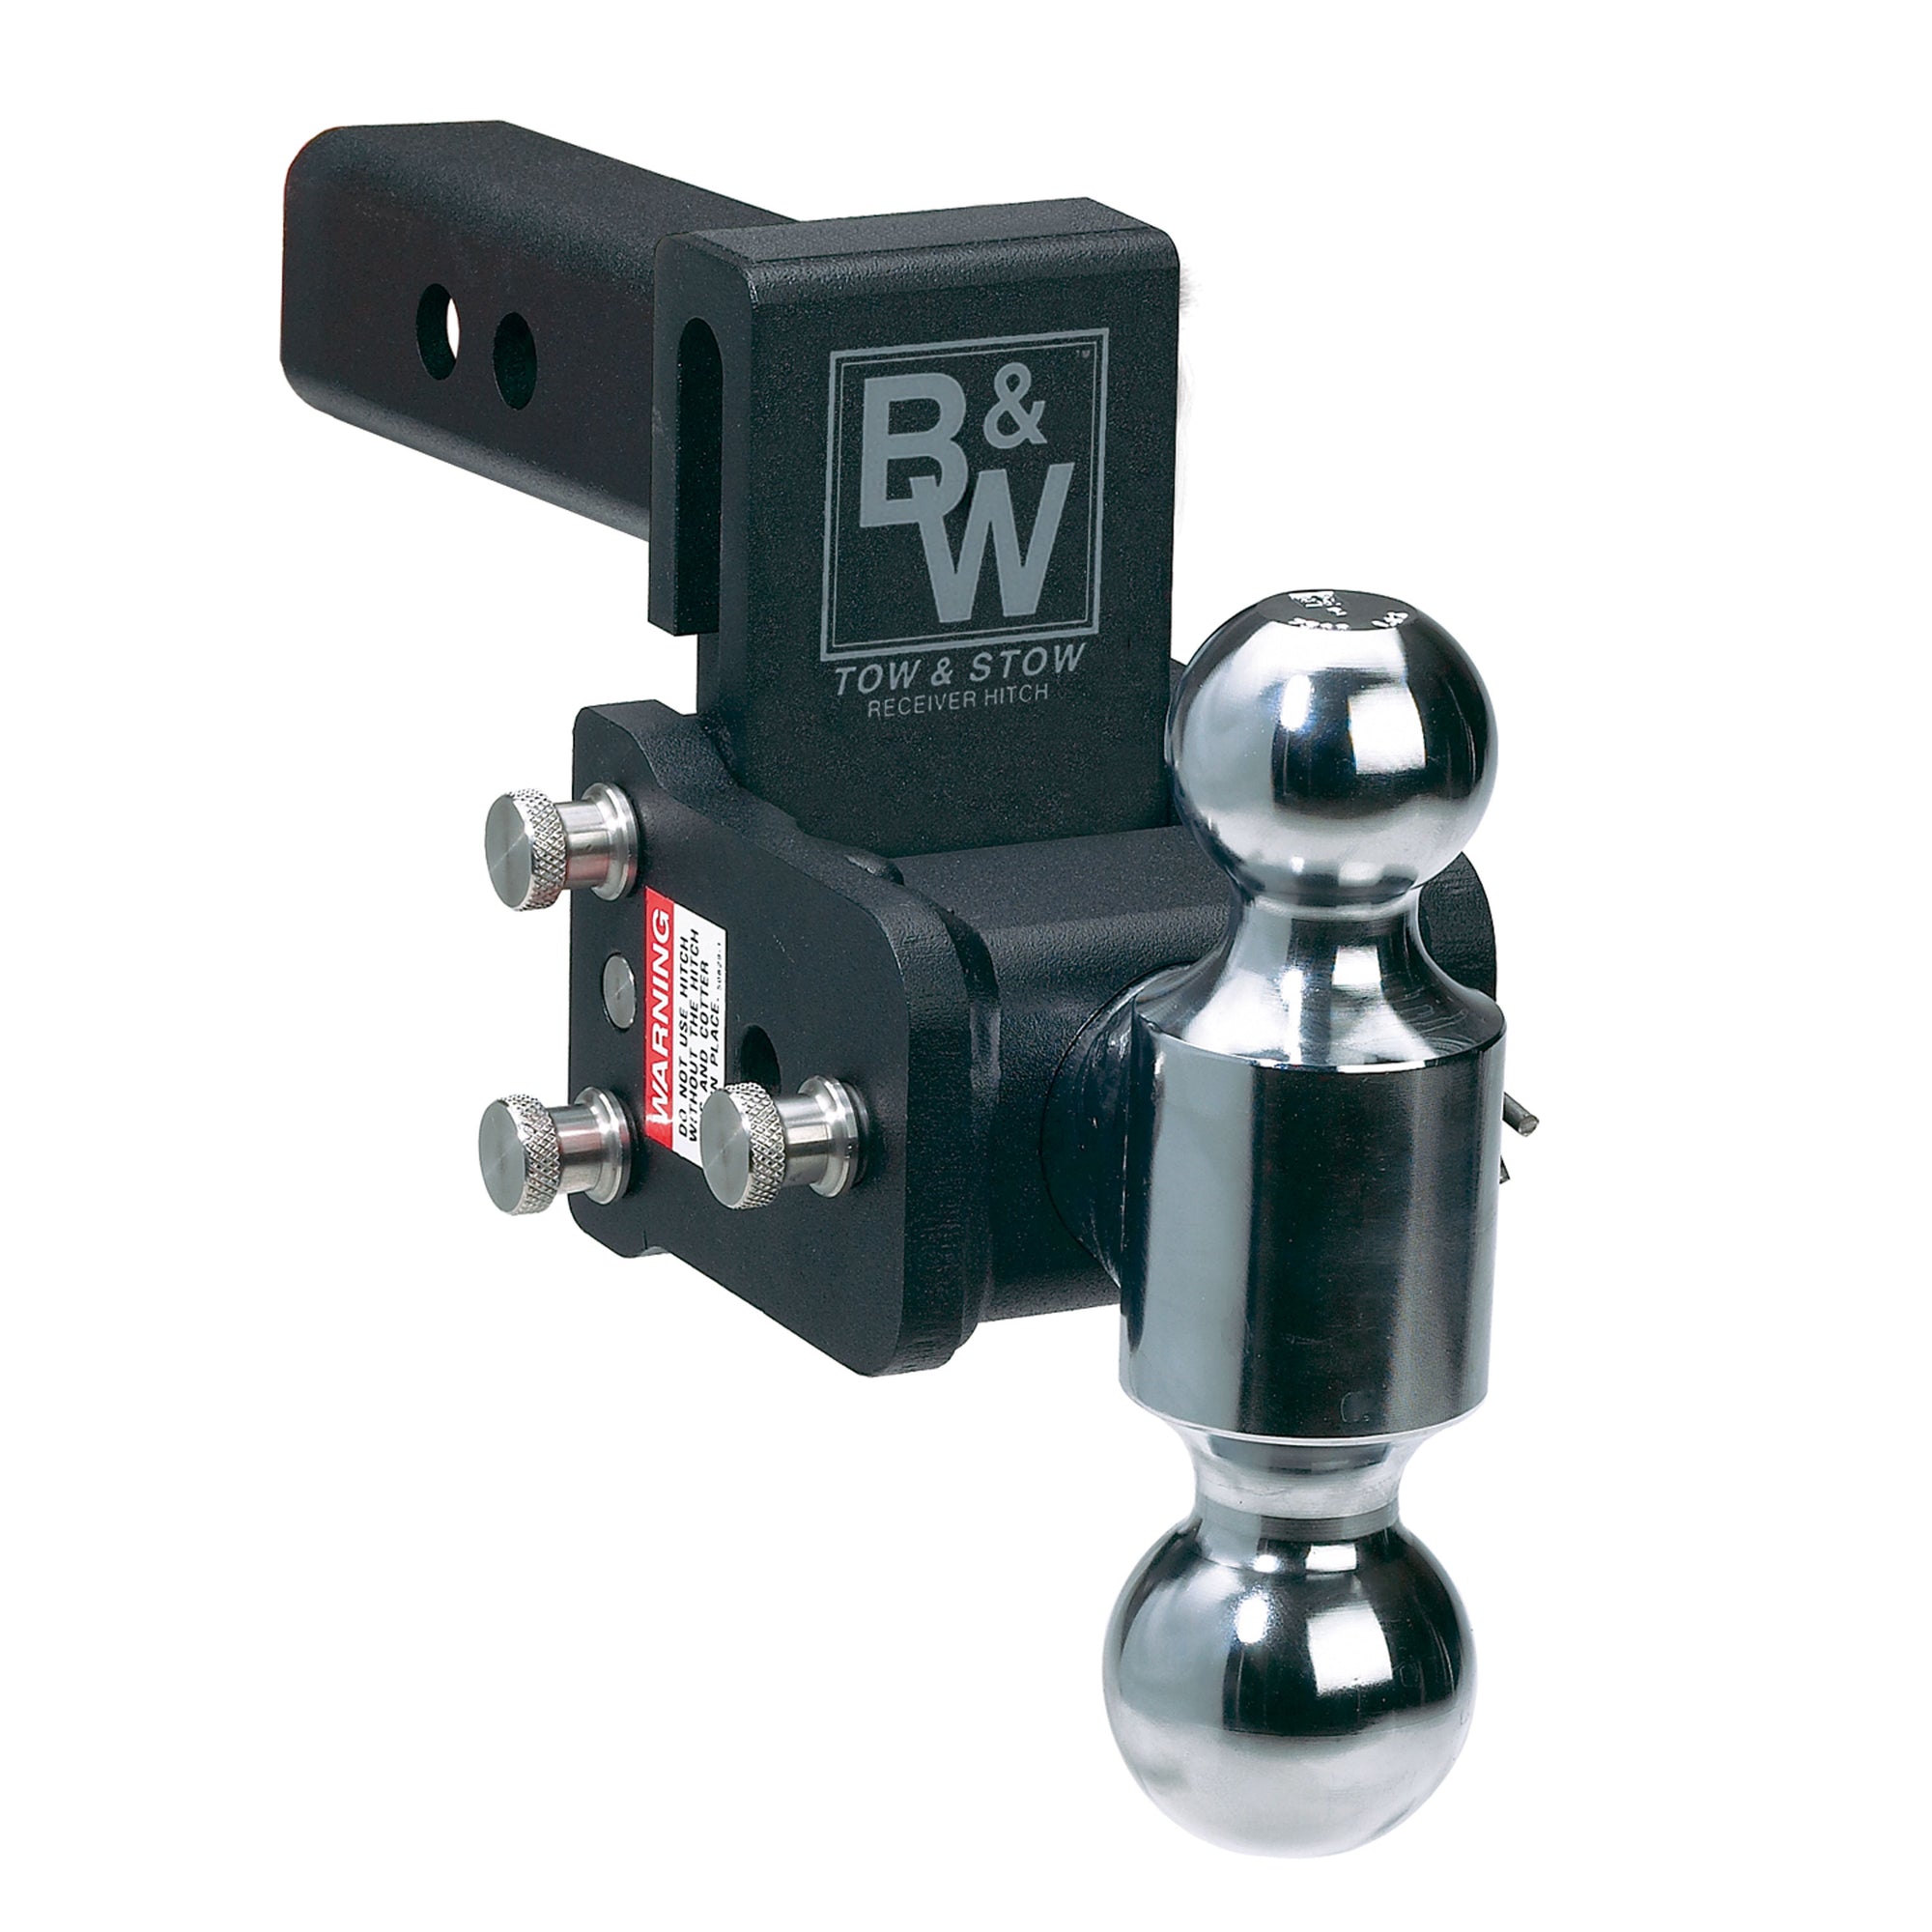 B&W Trailer Hitches TS30040B Tow and Stow Adjustable Ball Mount - 2-5/16" & 2" Ball, 7.5" Drop, 7" Rise, Black